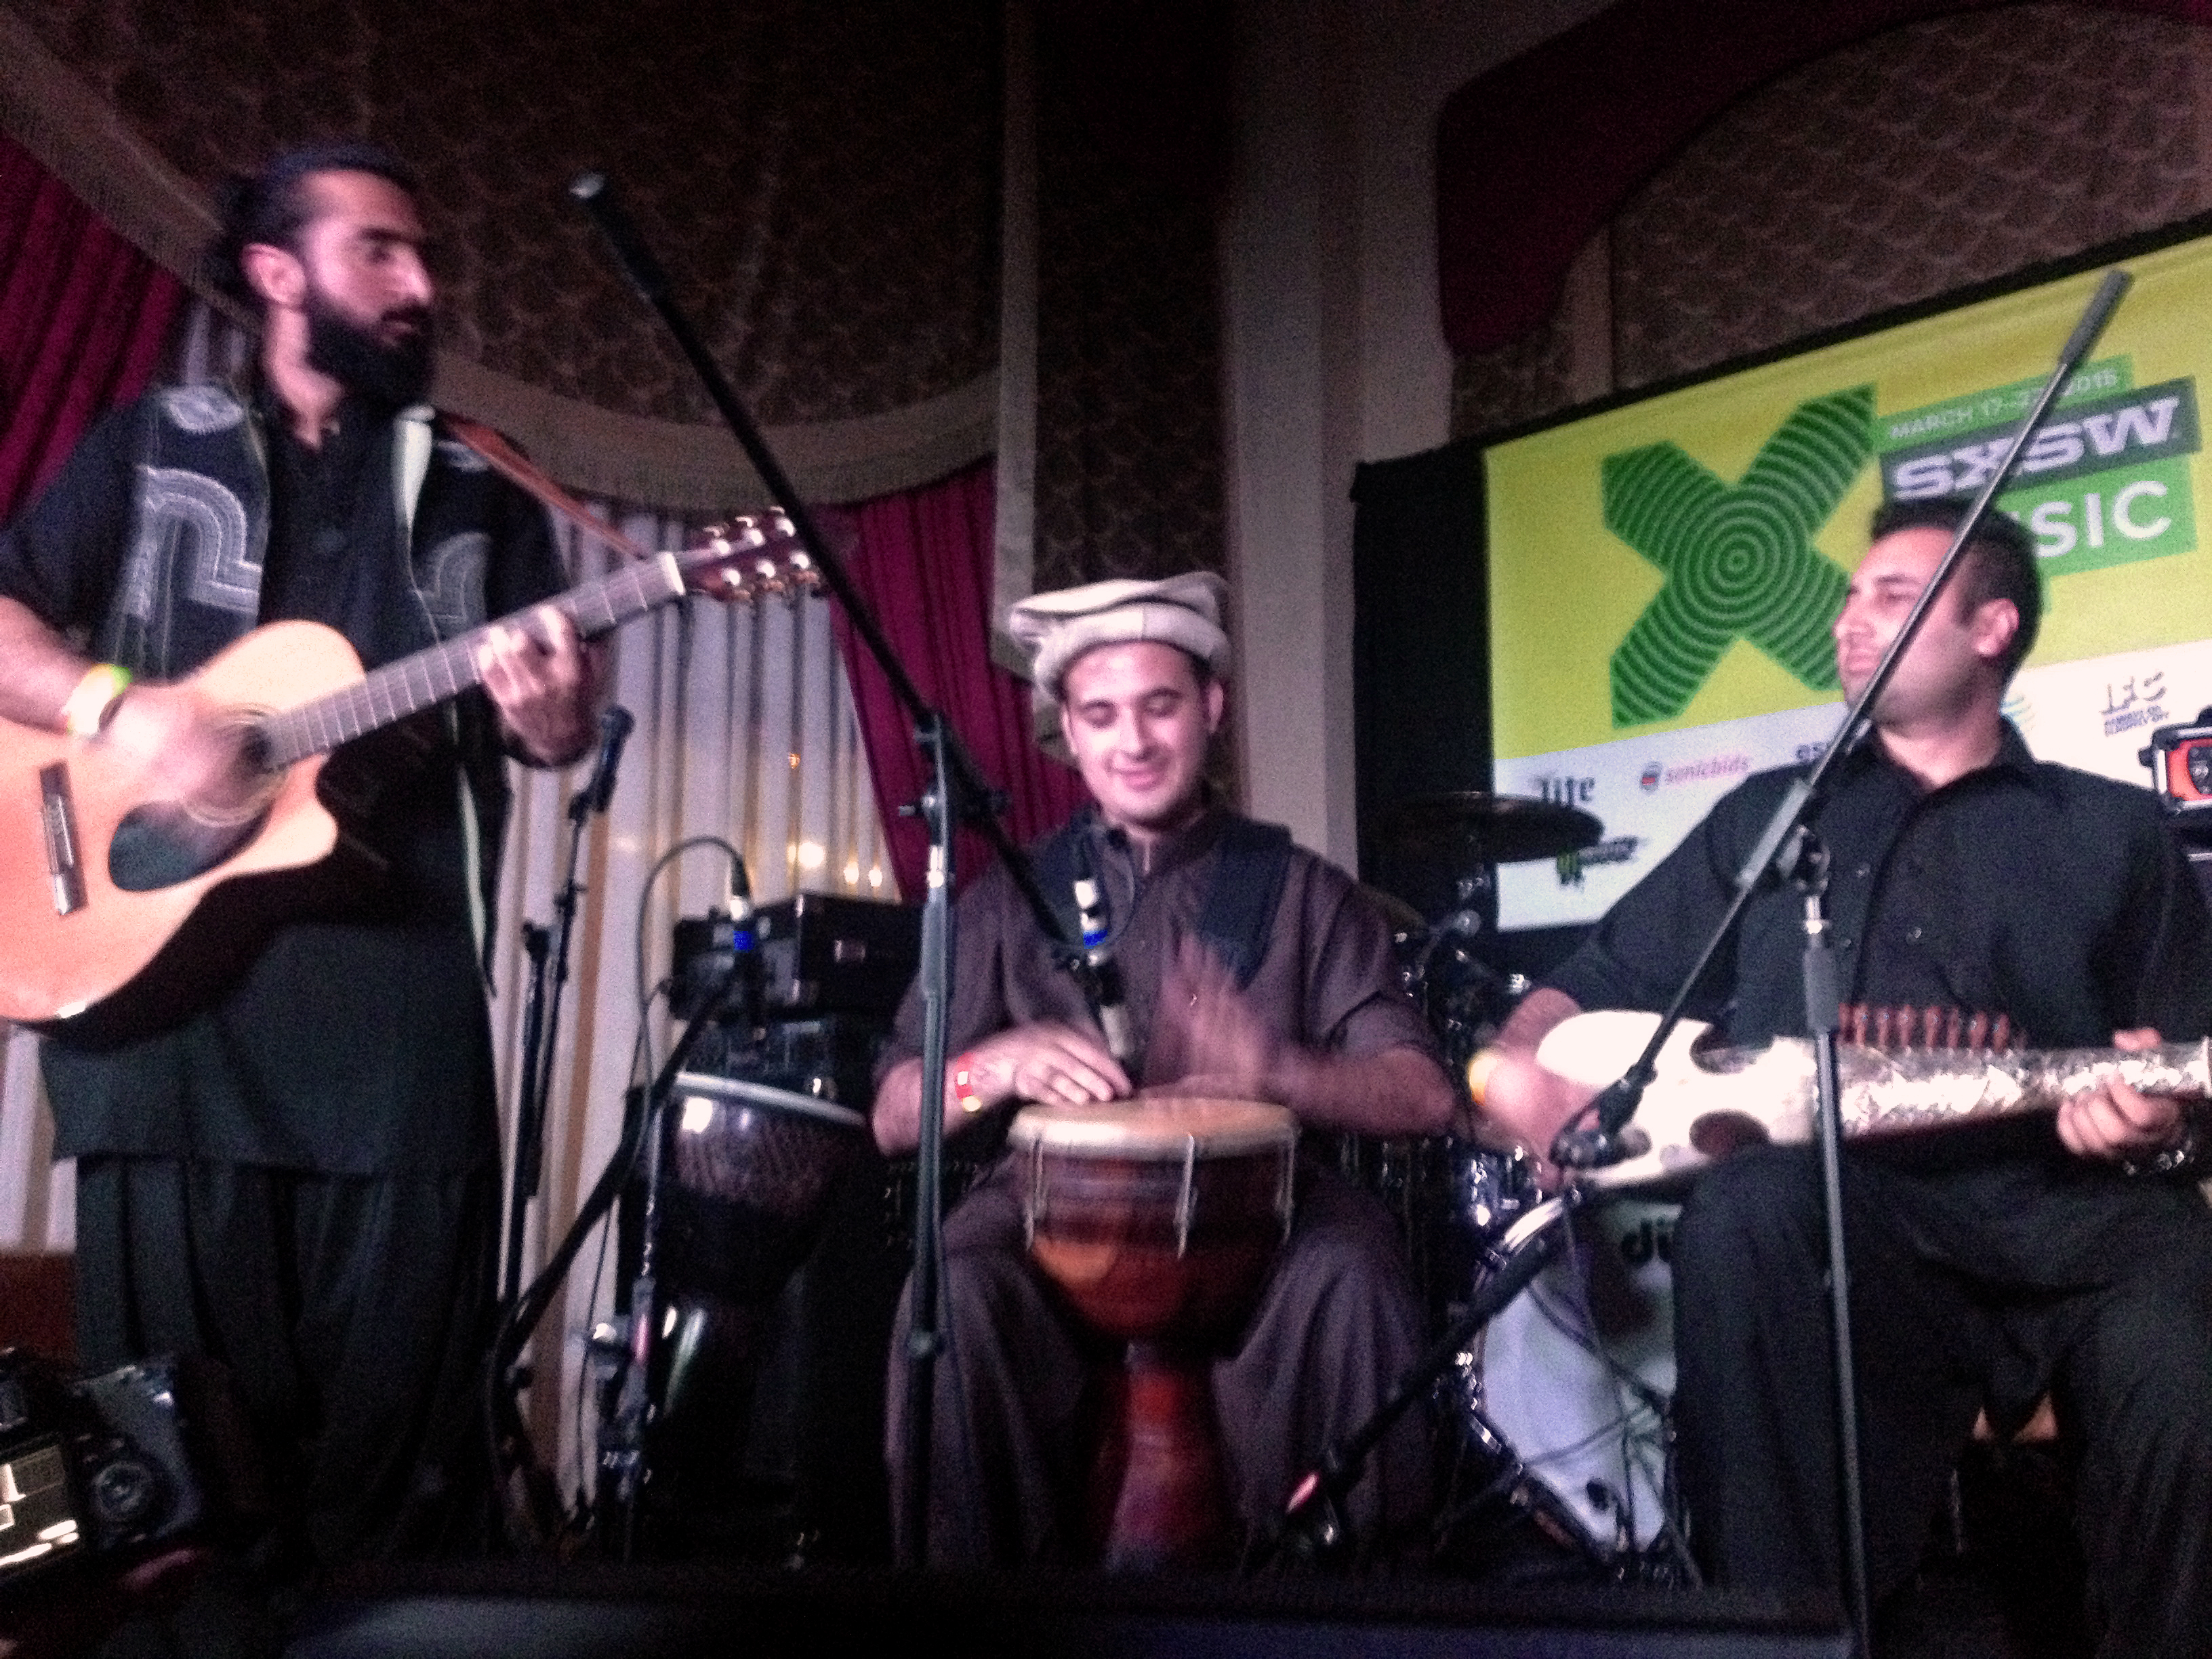 Khumariyaan performing at the Pakistan Showcase at SXSW, March 19, 2015. Photo by author Henna Tayyeb. Used with permission. 